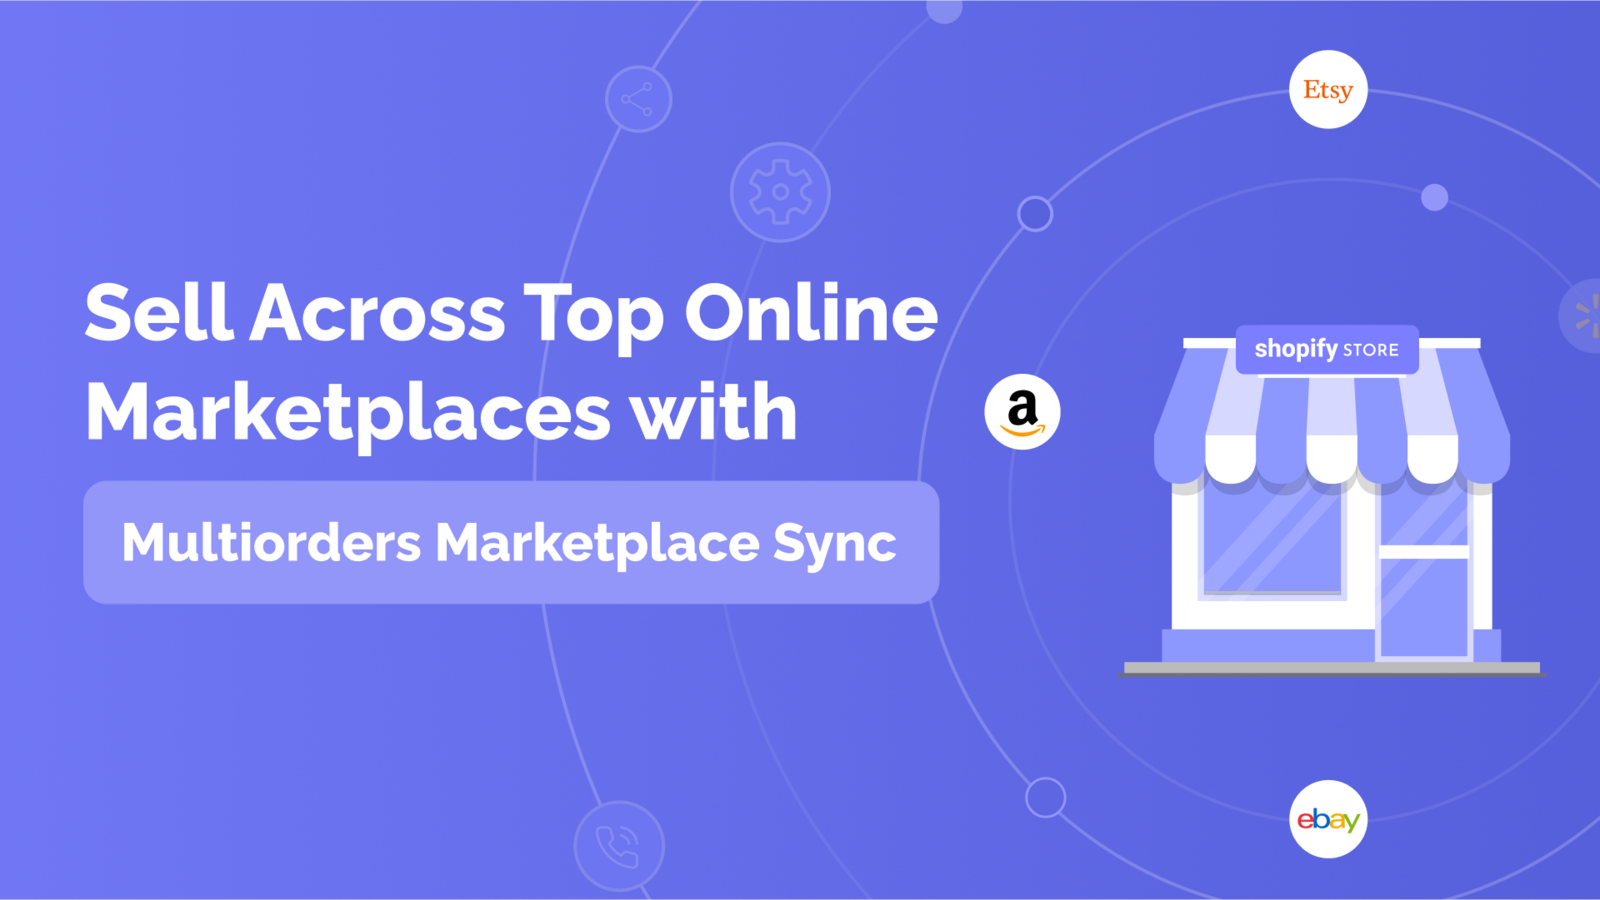 Boost your stores Revenue by selling on Marketplaces!